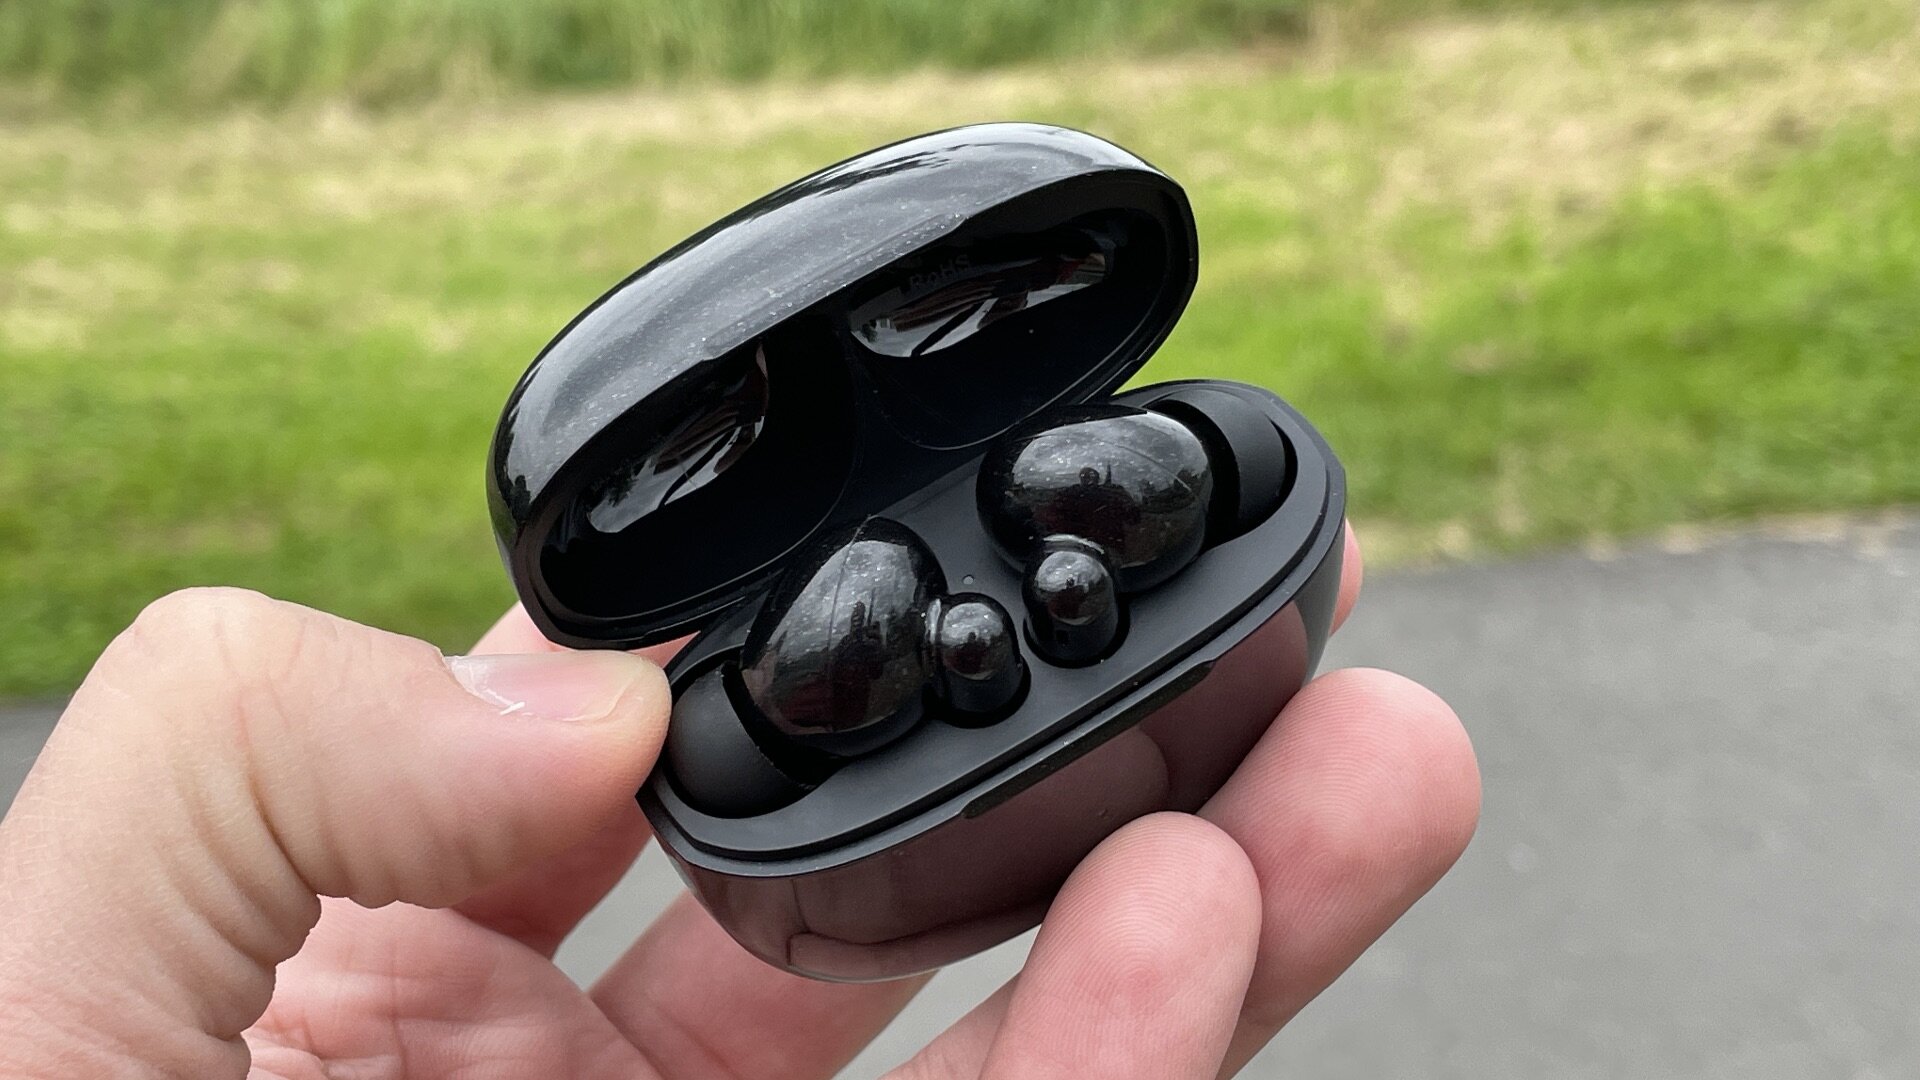 Grab the earbuds by the ear tips to get them out of the case the easiest way